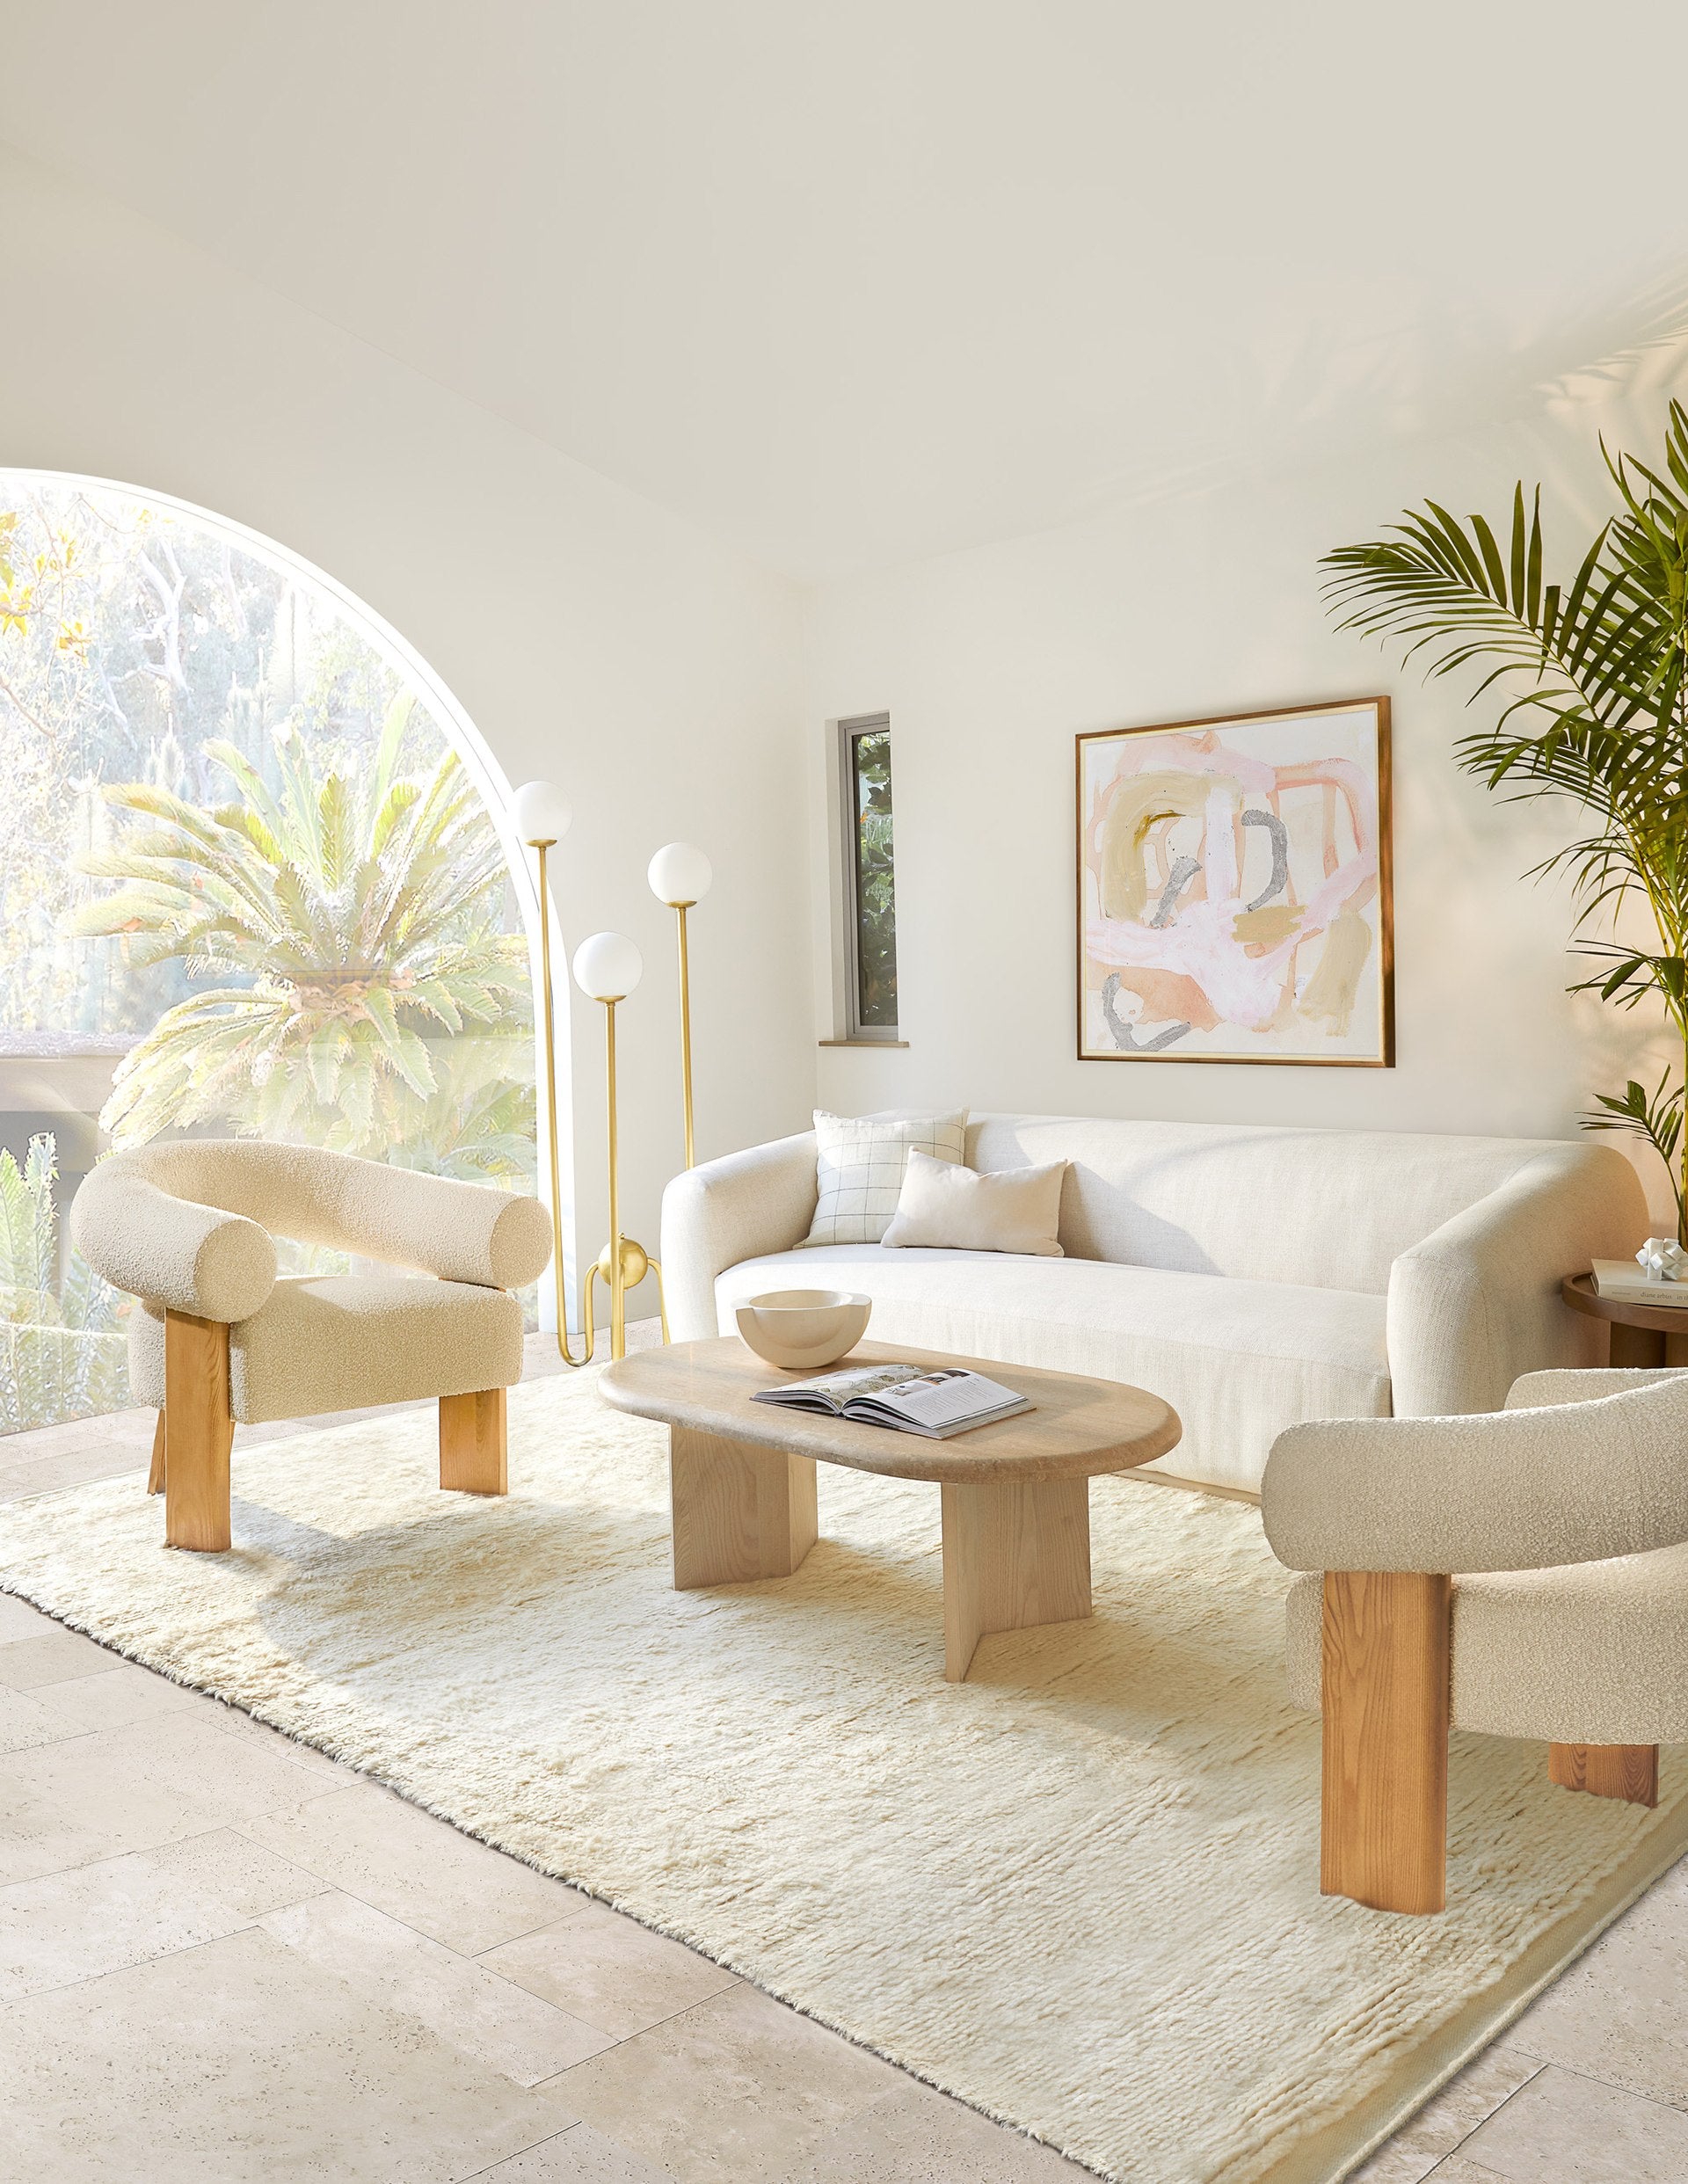 The rounded Harlowe sofa anchors this living room and is offset with two rounded Celeste neutral boucle accent chairs, a light wood coffee table, and gold floor lamp.